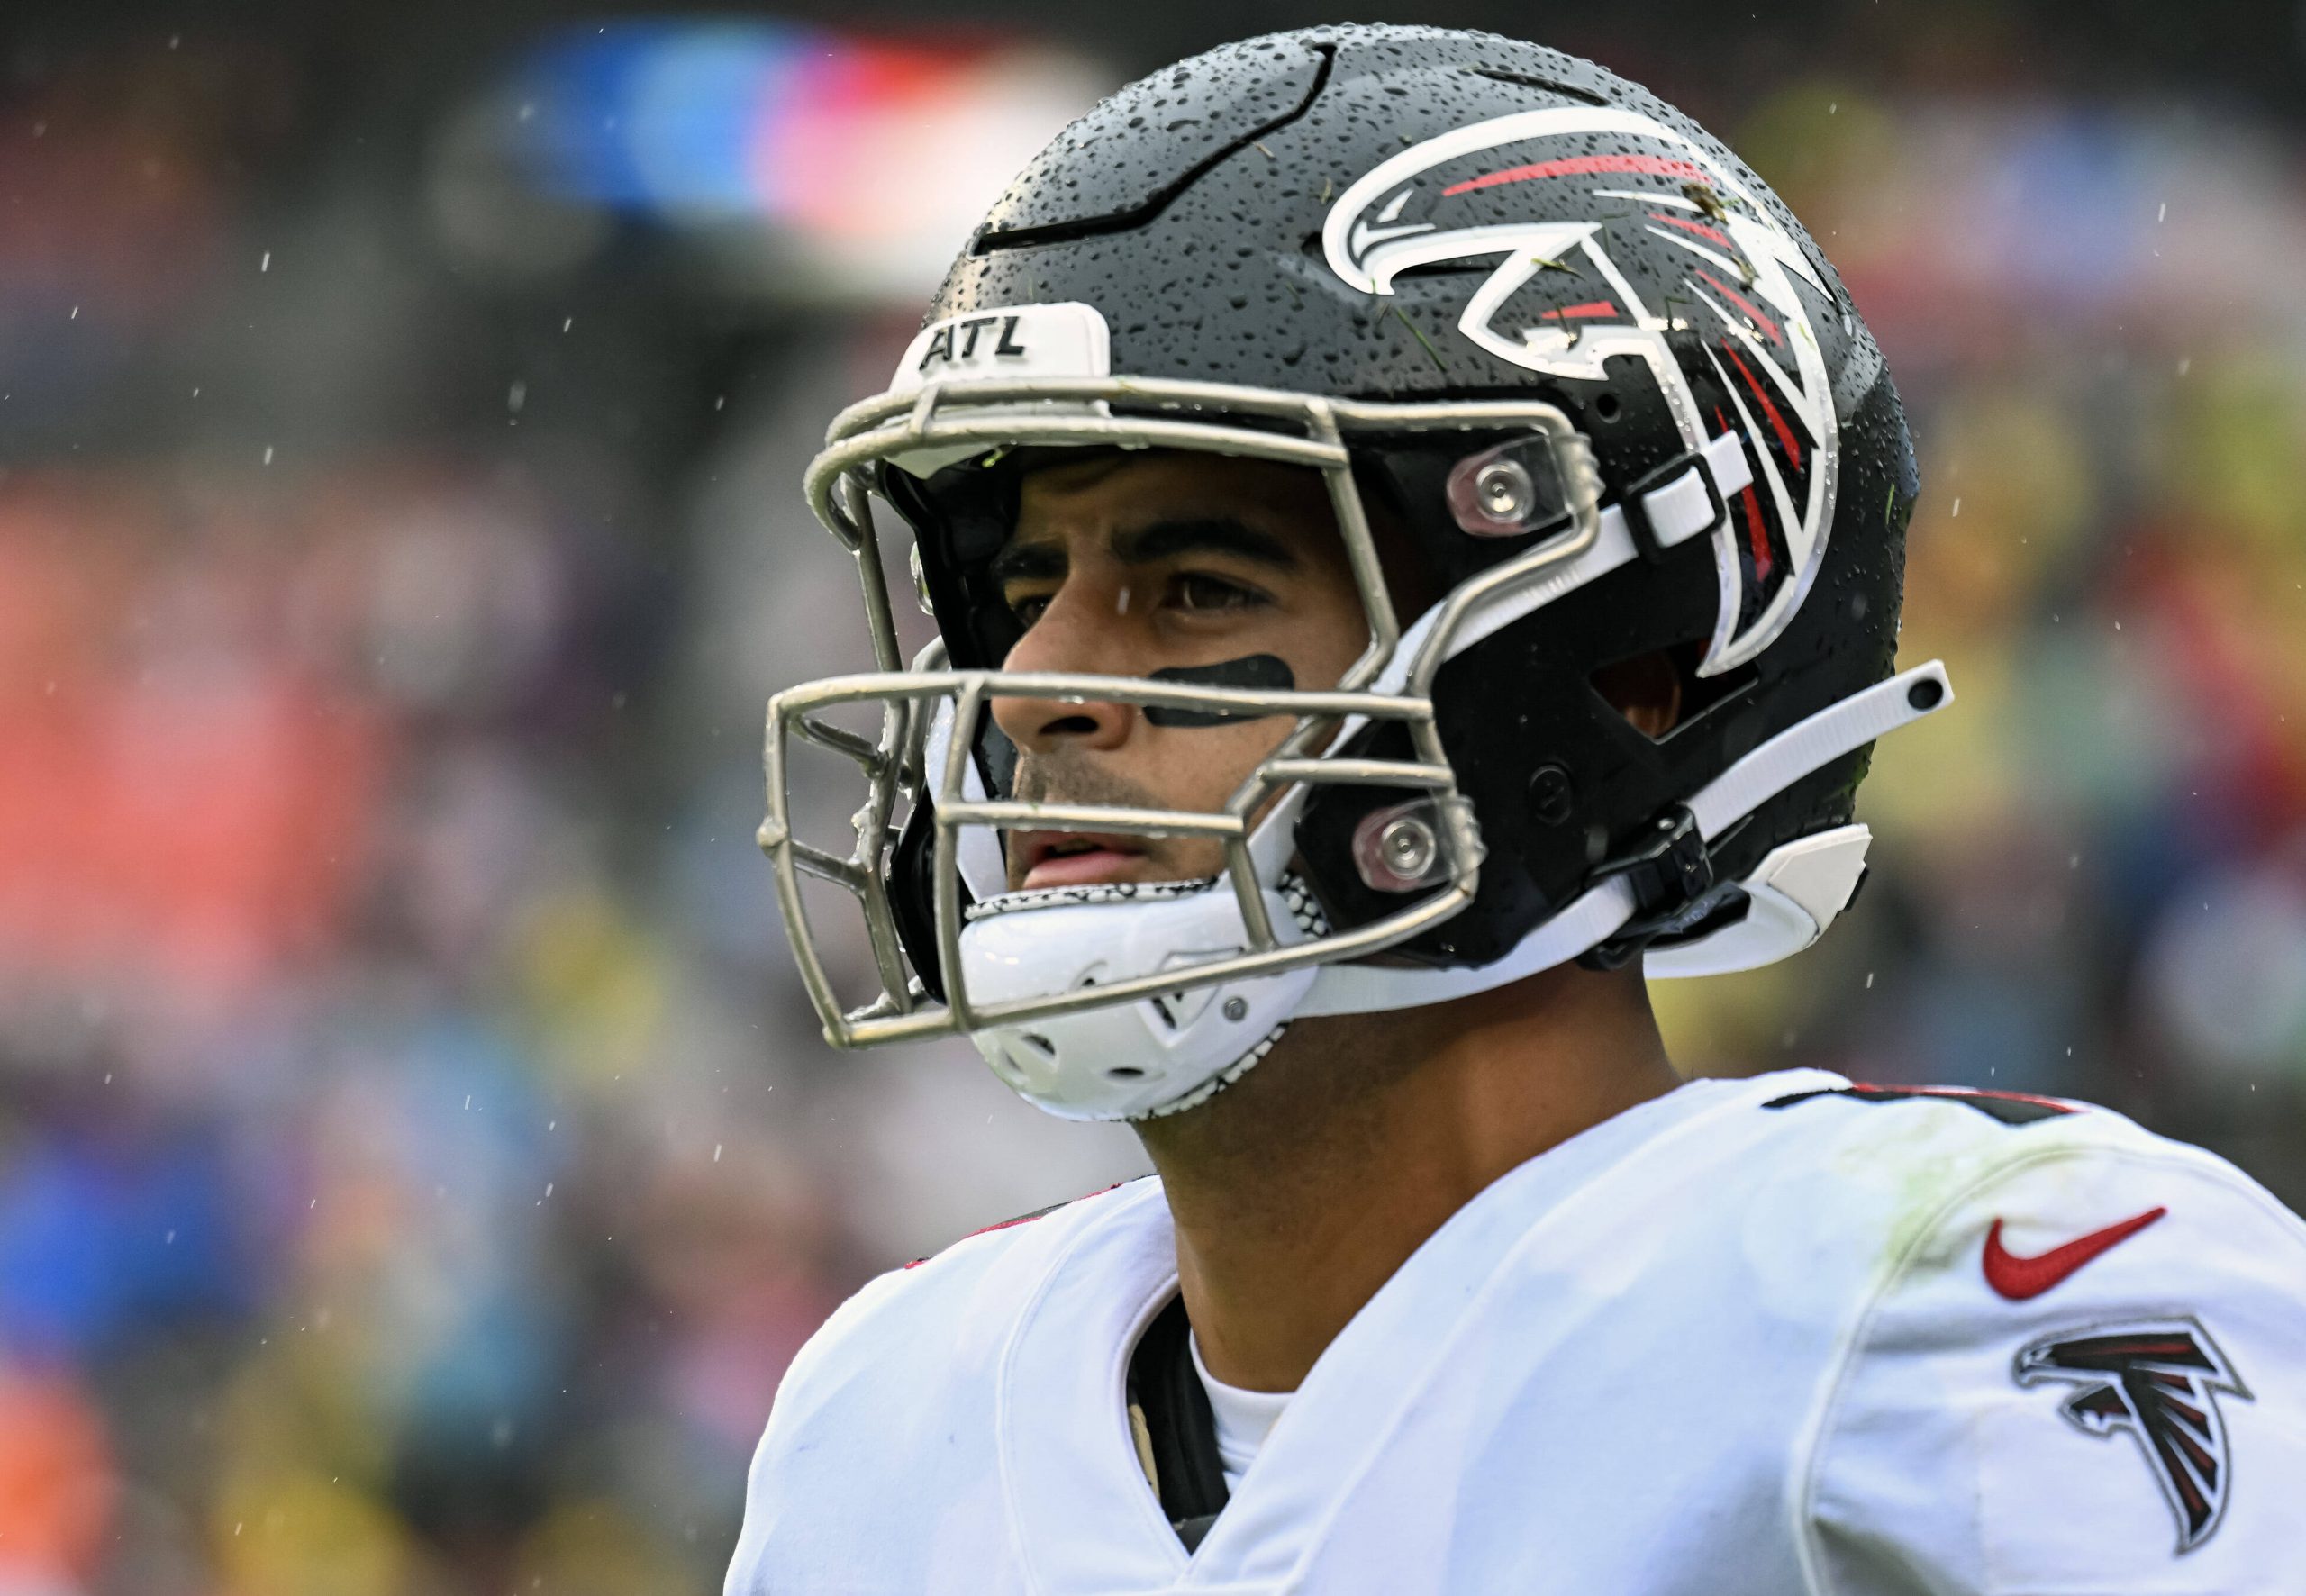 LANDOVER, MD - NOVEMBER 27: Atlanta Falcons quarterback Marcus Mariota 1 in action during the NFL, American Football Herren, USA game between the Atlanta Falcons and the Washington Commanders on November 27, 2022 at Fed Ex Field in Landover, MD. Photo by Mark Goldman/Icon Sportswire NFL: NOV 27 Falcons at Commanders Icon749221127122